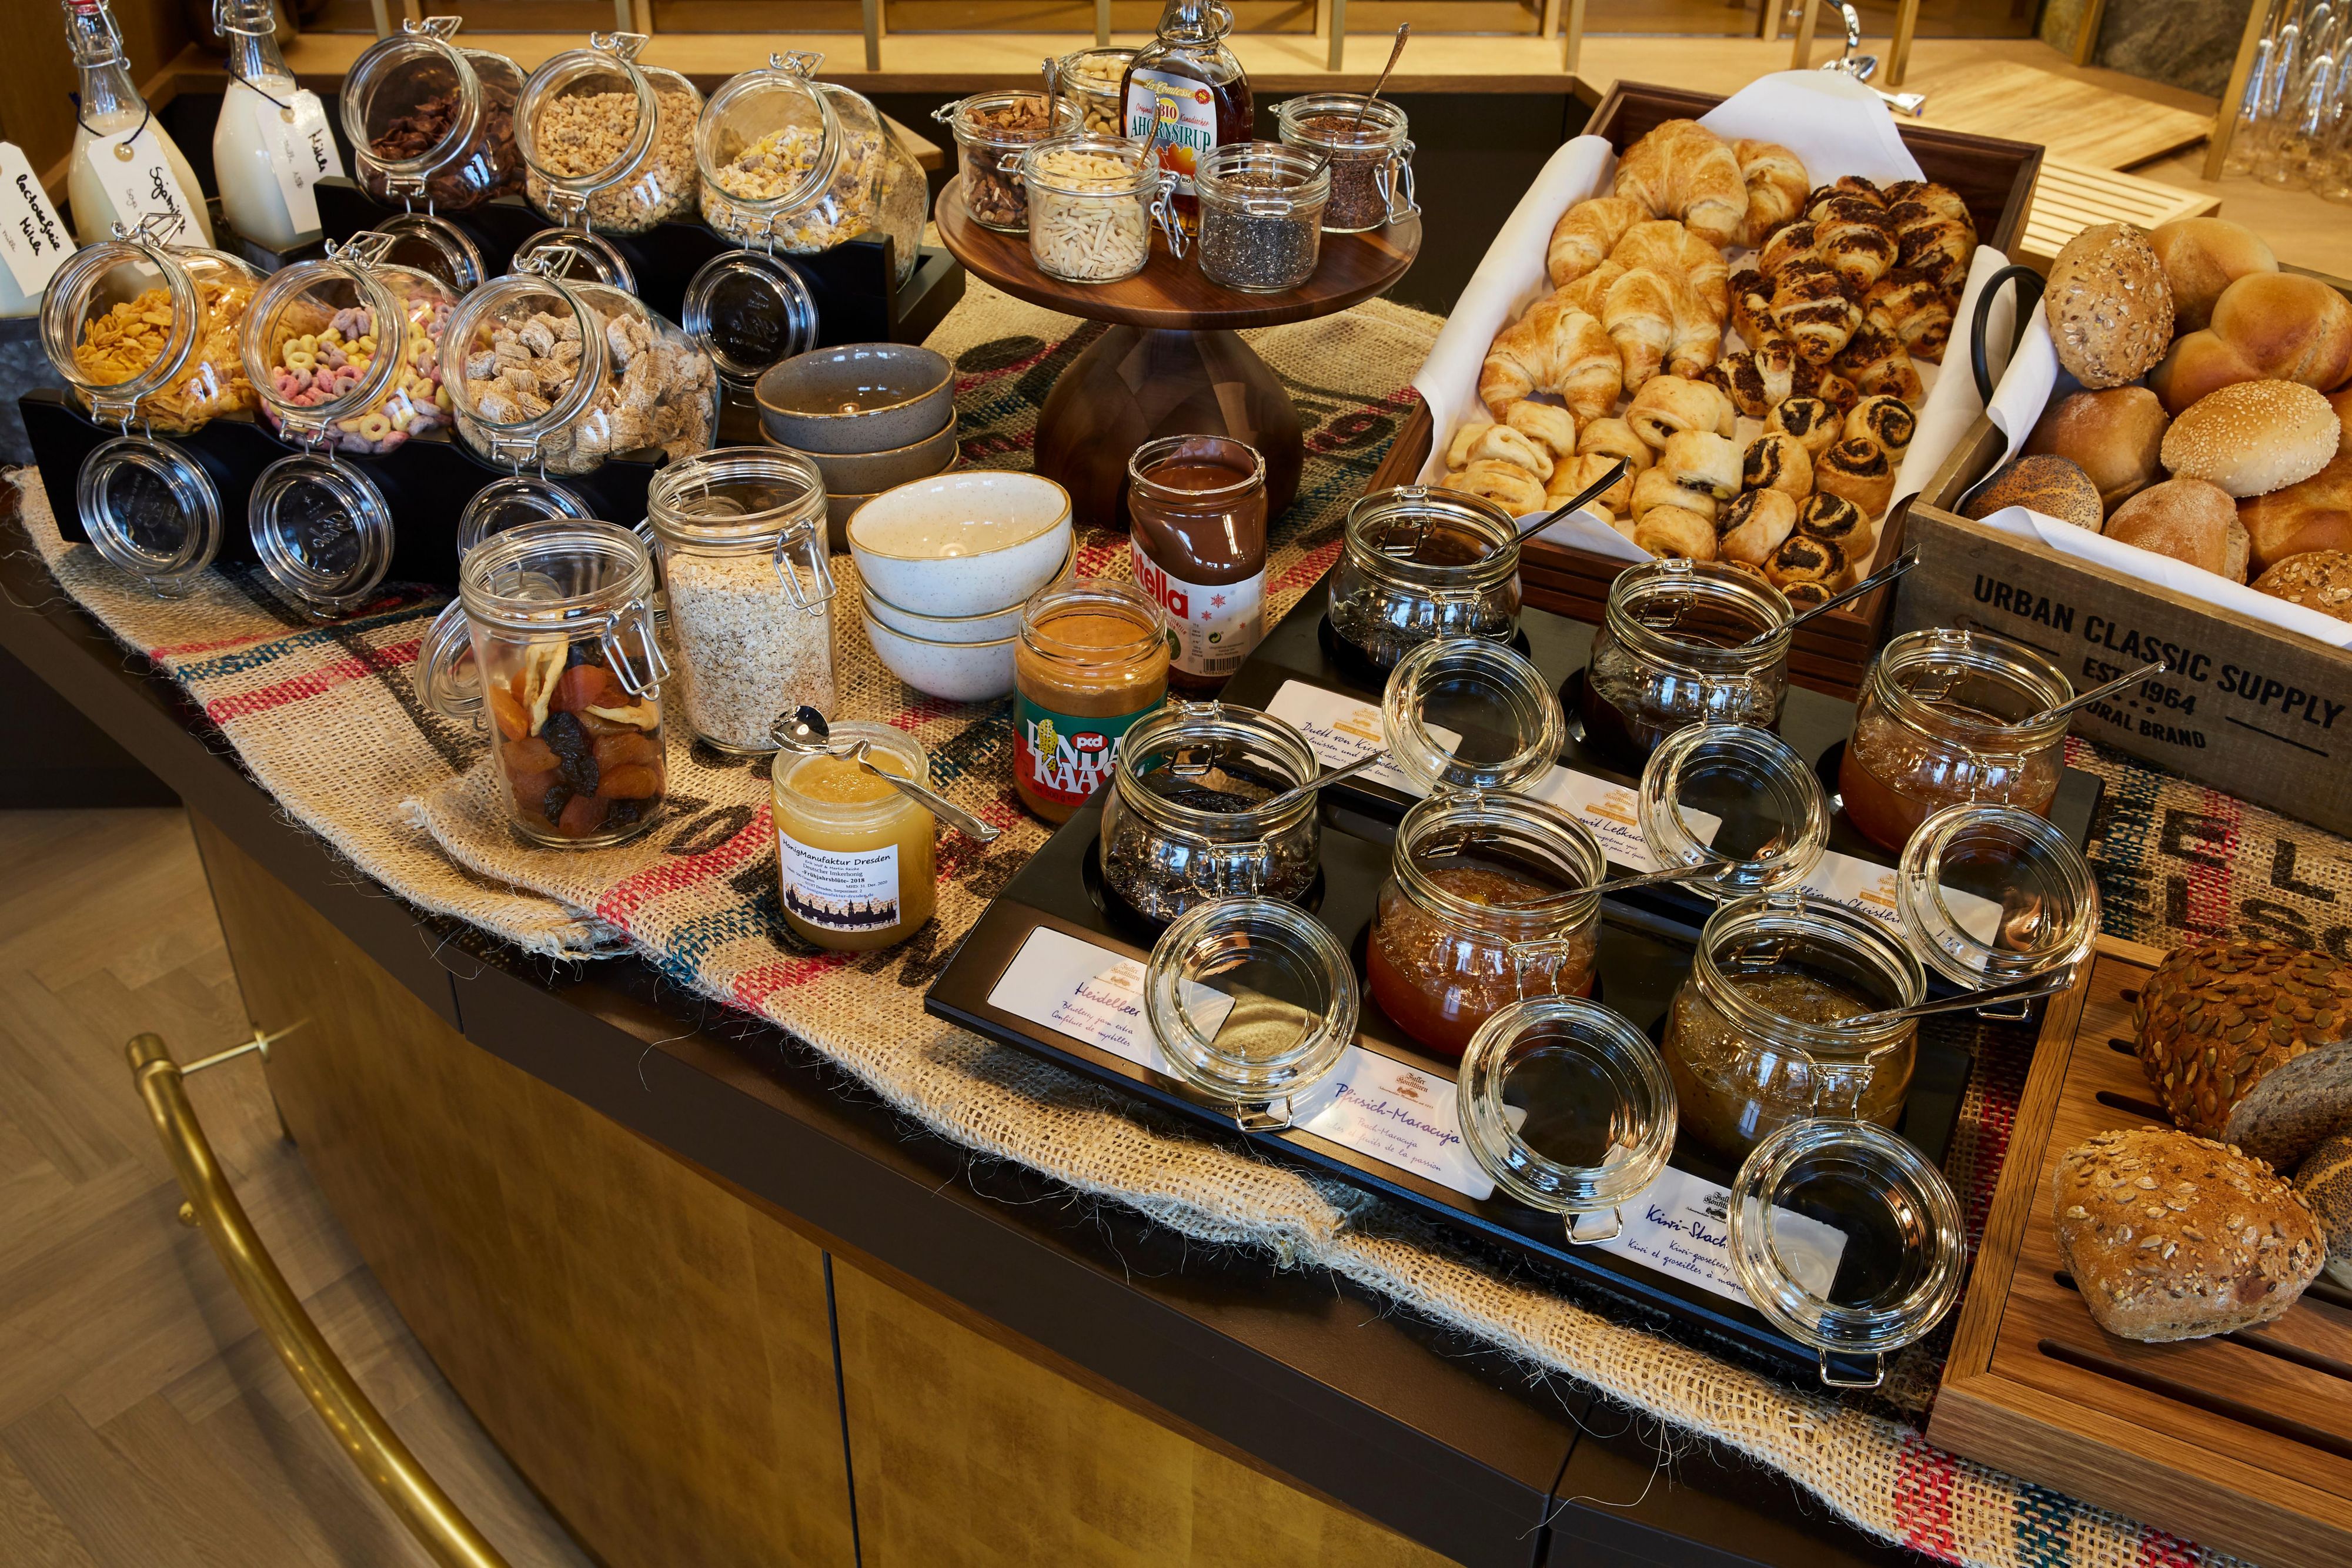 Enjoy our rich breakfast buffet with homemade salads, jams, smoothies, and cakes, honey from Dresdner beekeeper, varied bread roll and bread selection from regional bakery Grundmann and a la carte prepared egg dishes. Start your day with freshly brewed filter coffee and specialty coffees.